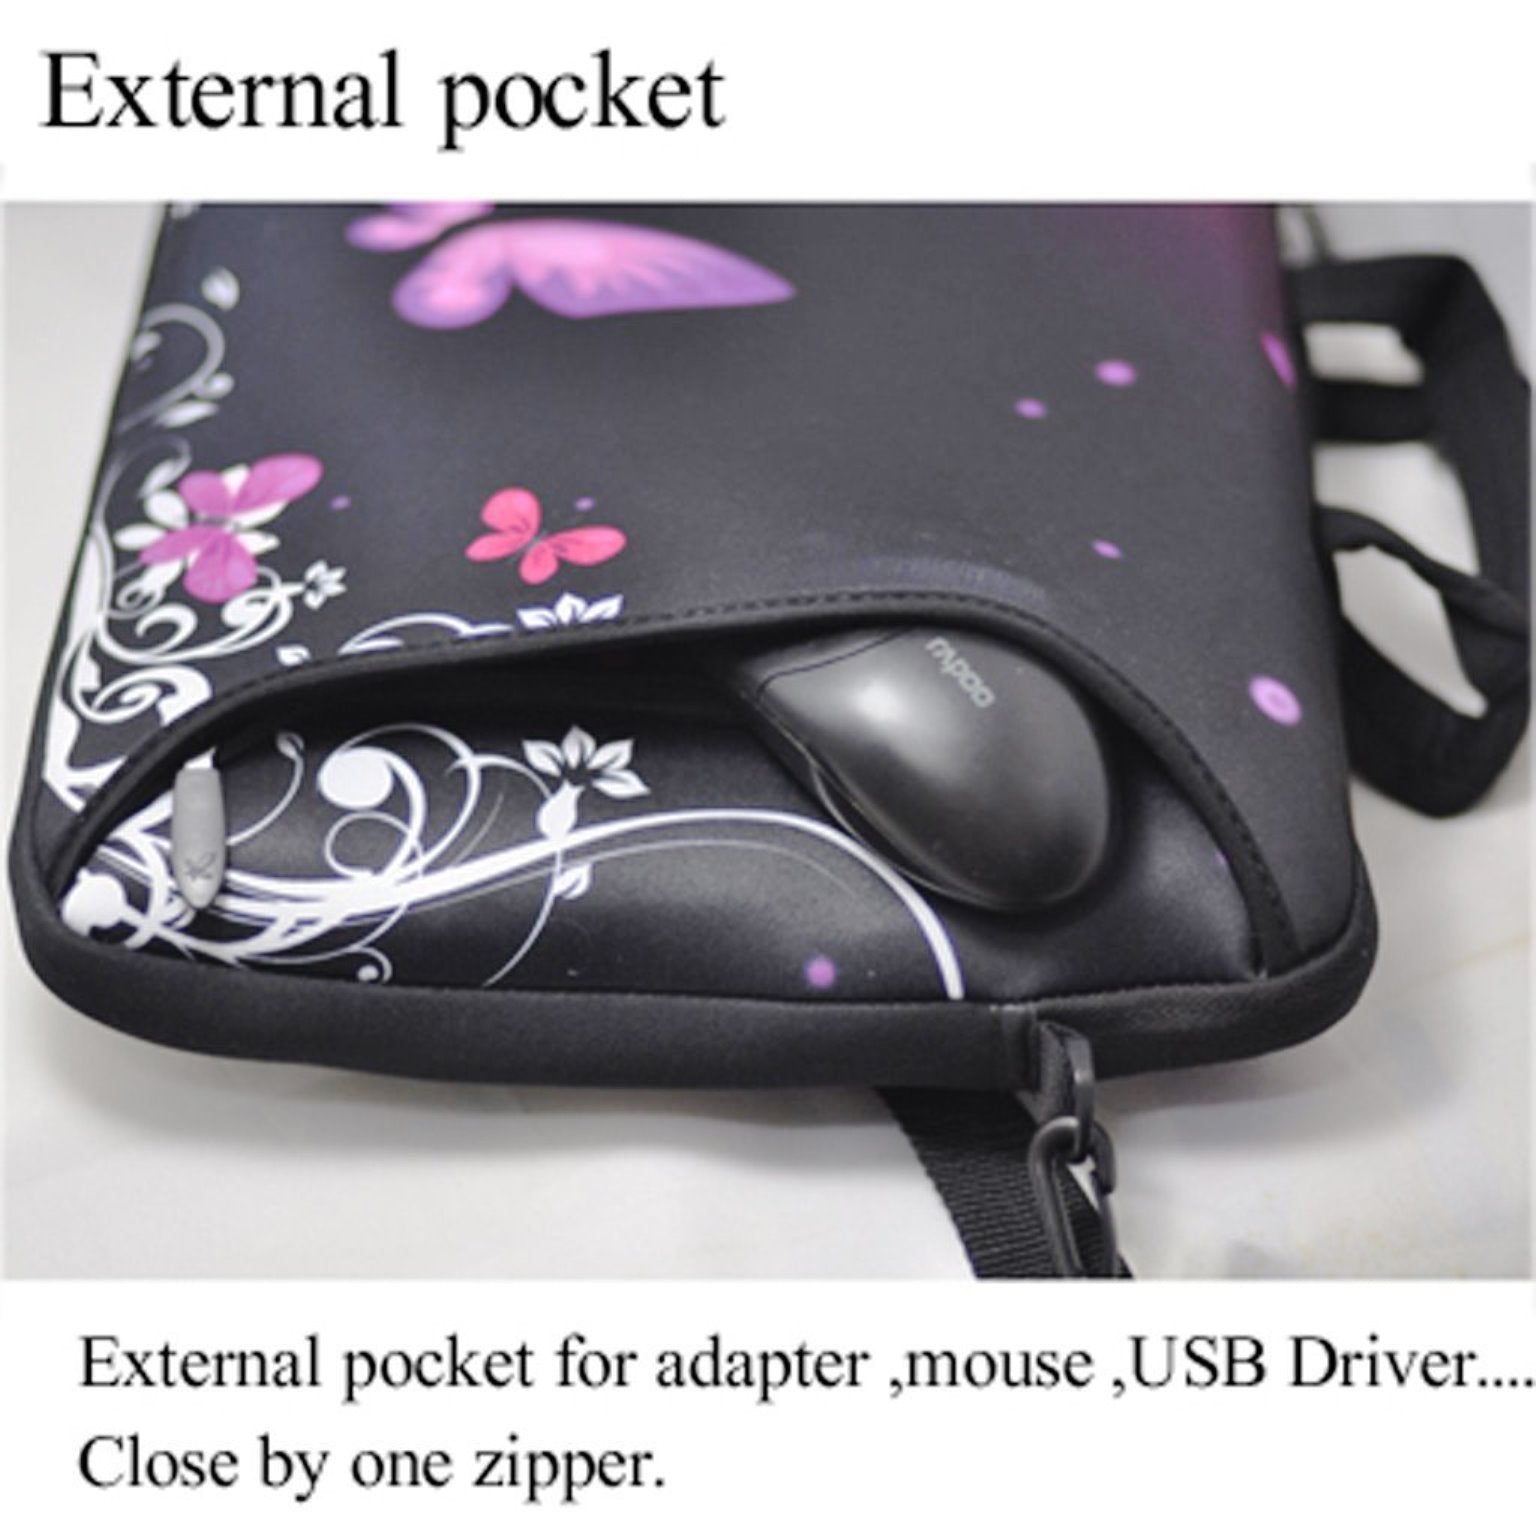 15"- 15.6" (inch) LAPTOP BAG CARRY CASE/BAG WITH HANDLE & STRAP NEOPRENE FOR LAPTOPS/NOTEBOOKS, *Owl*